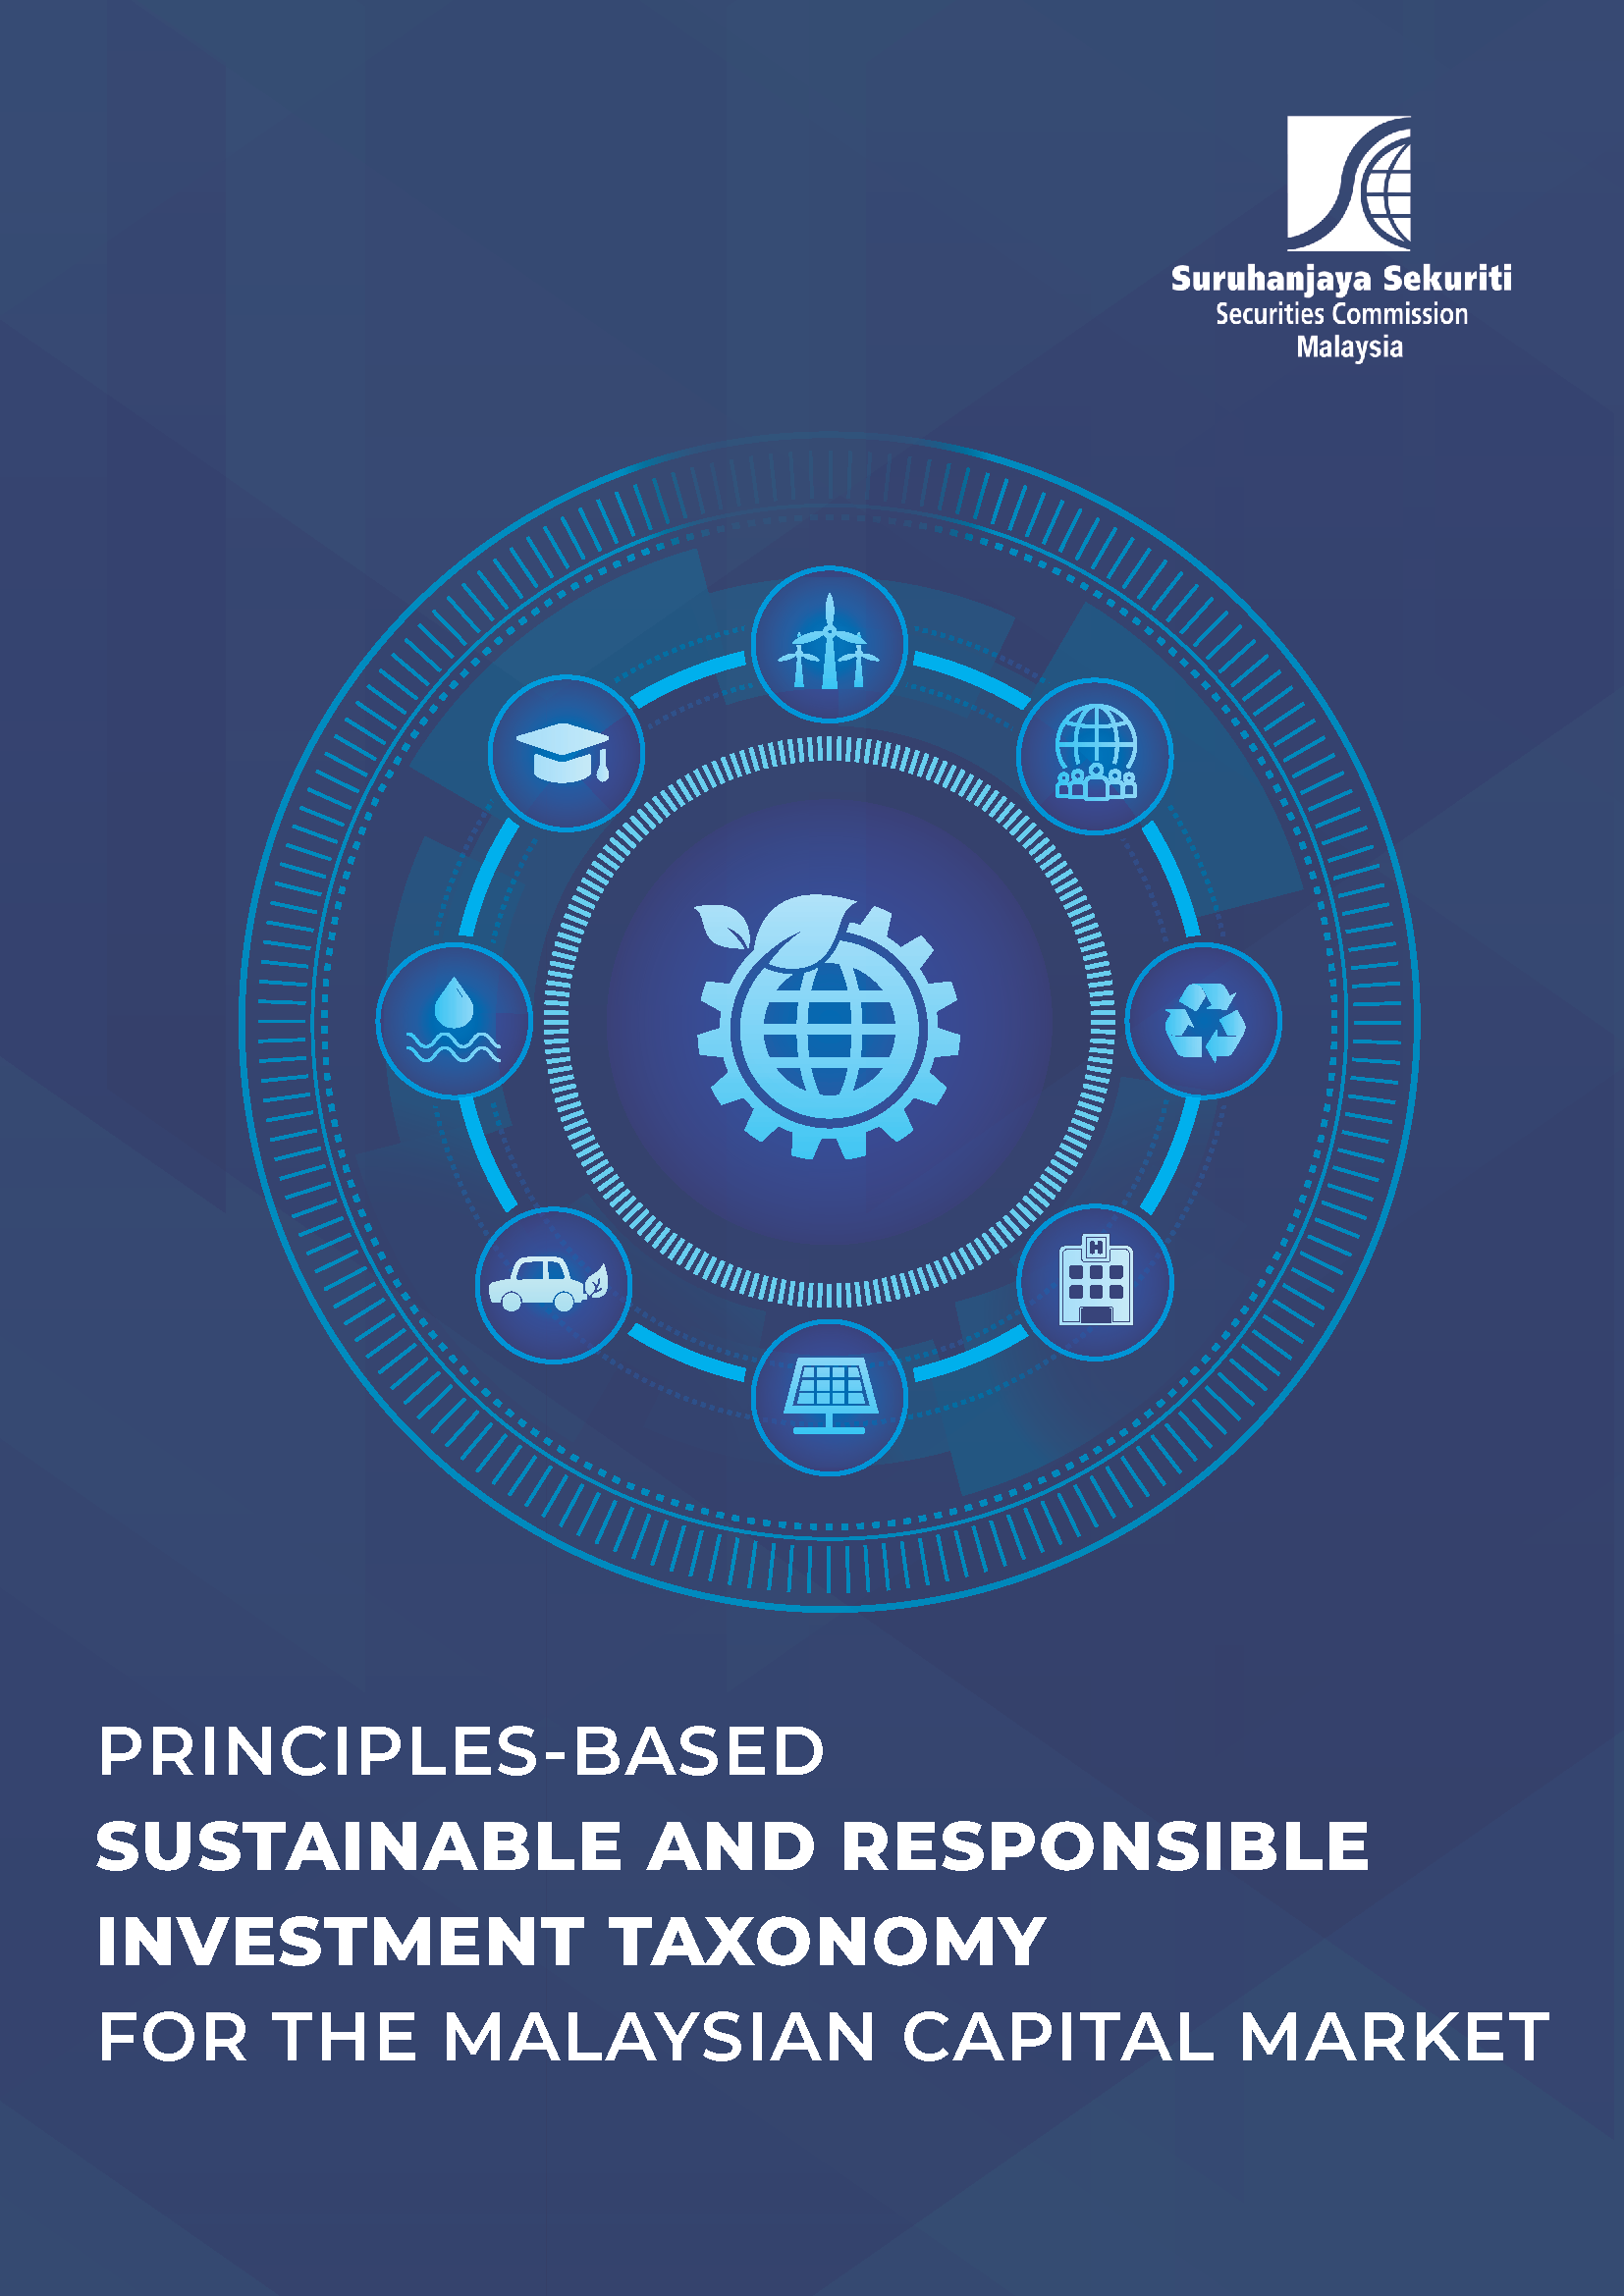 SC Unveils Principles-Based Sustainable and Responsible Investment Taxonomy for the Malaysian Capital Market